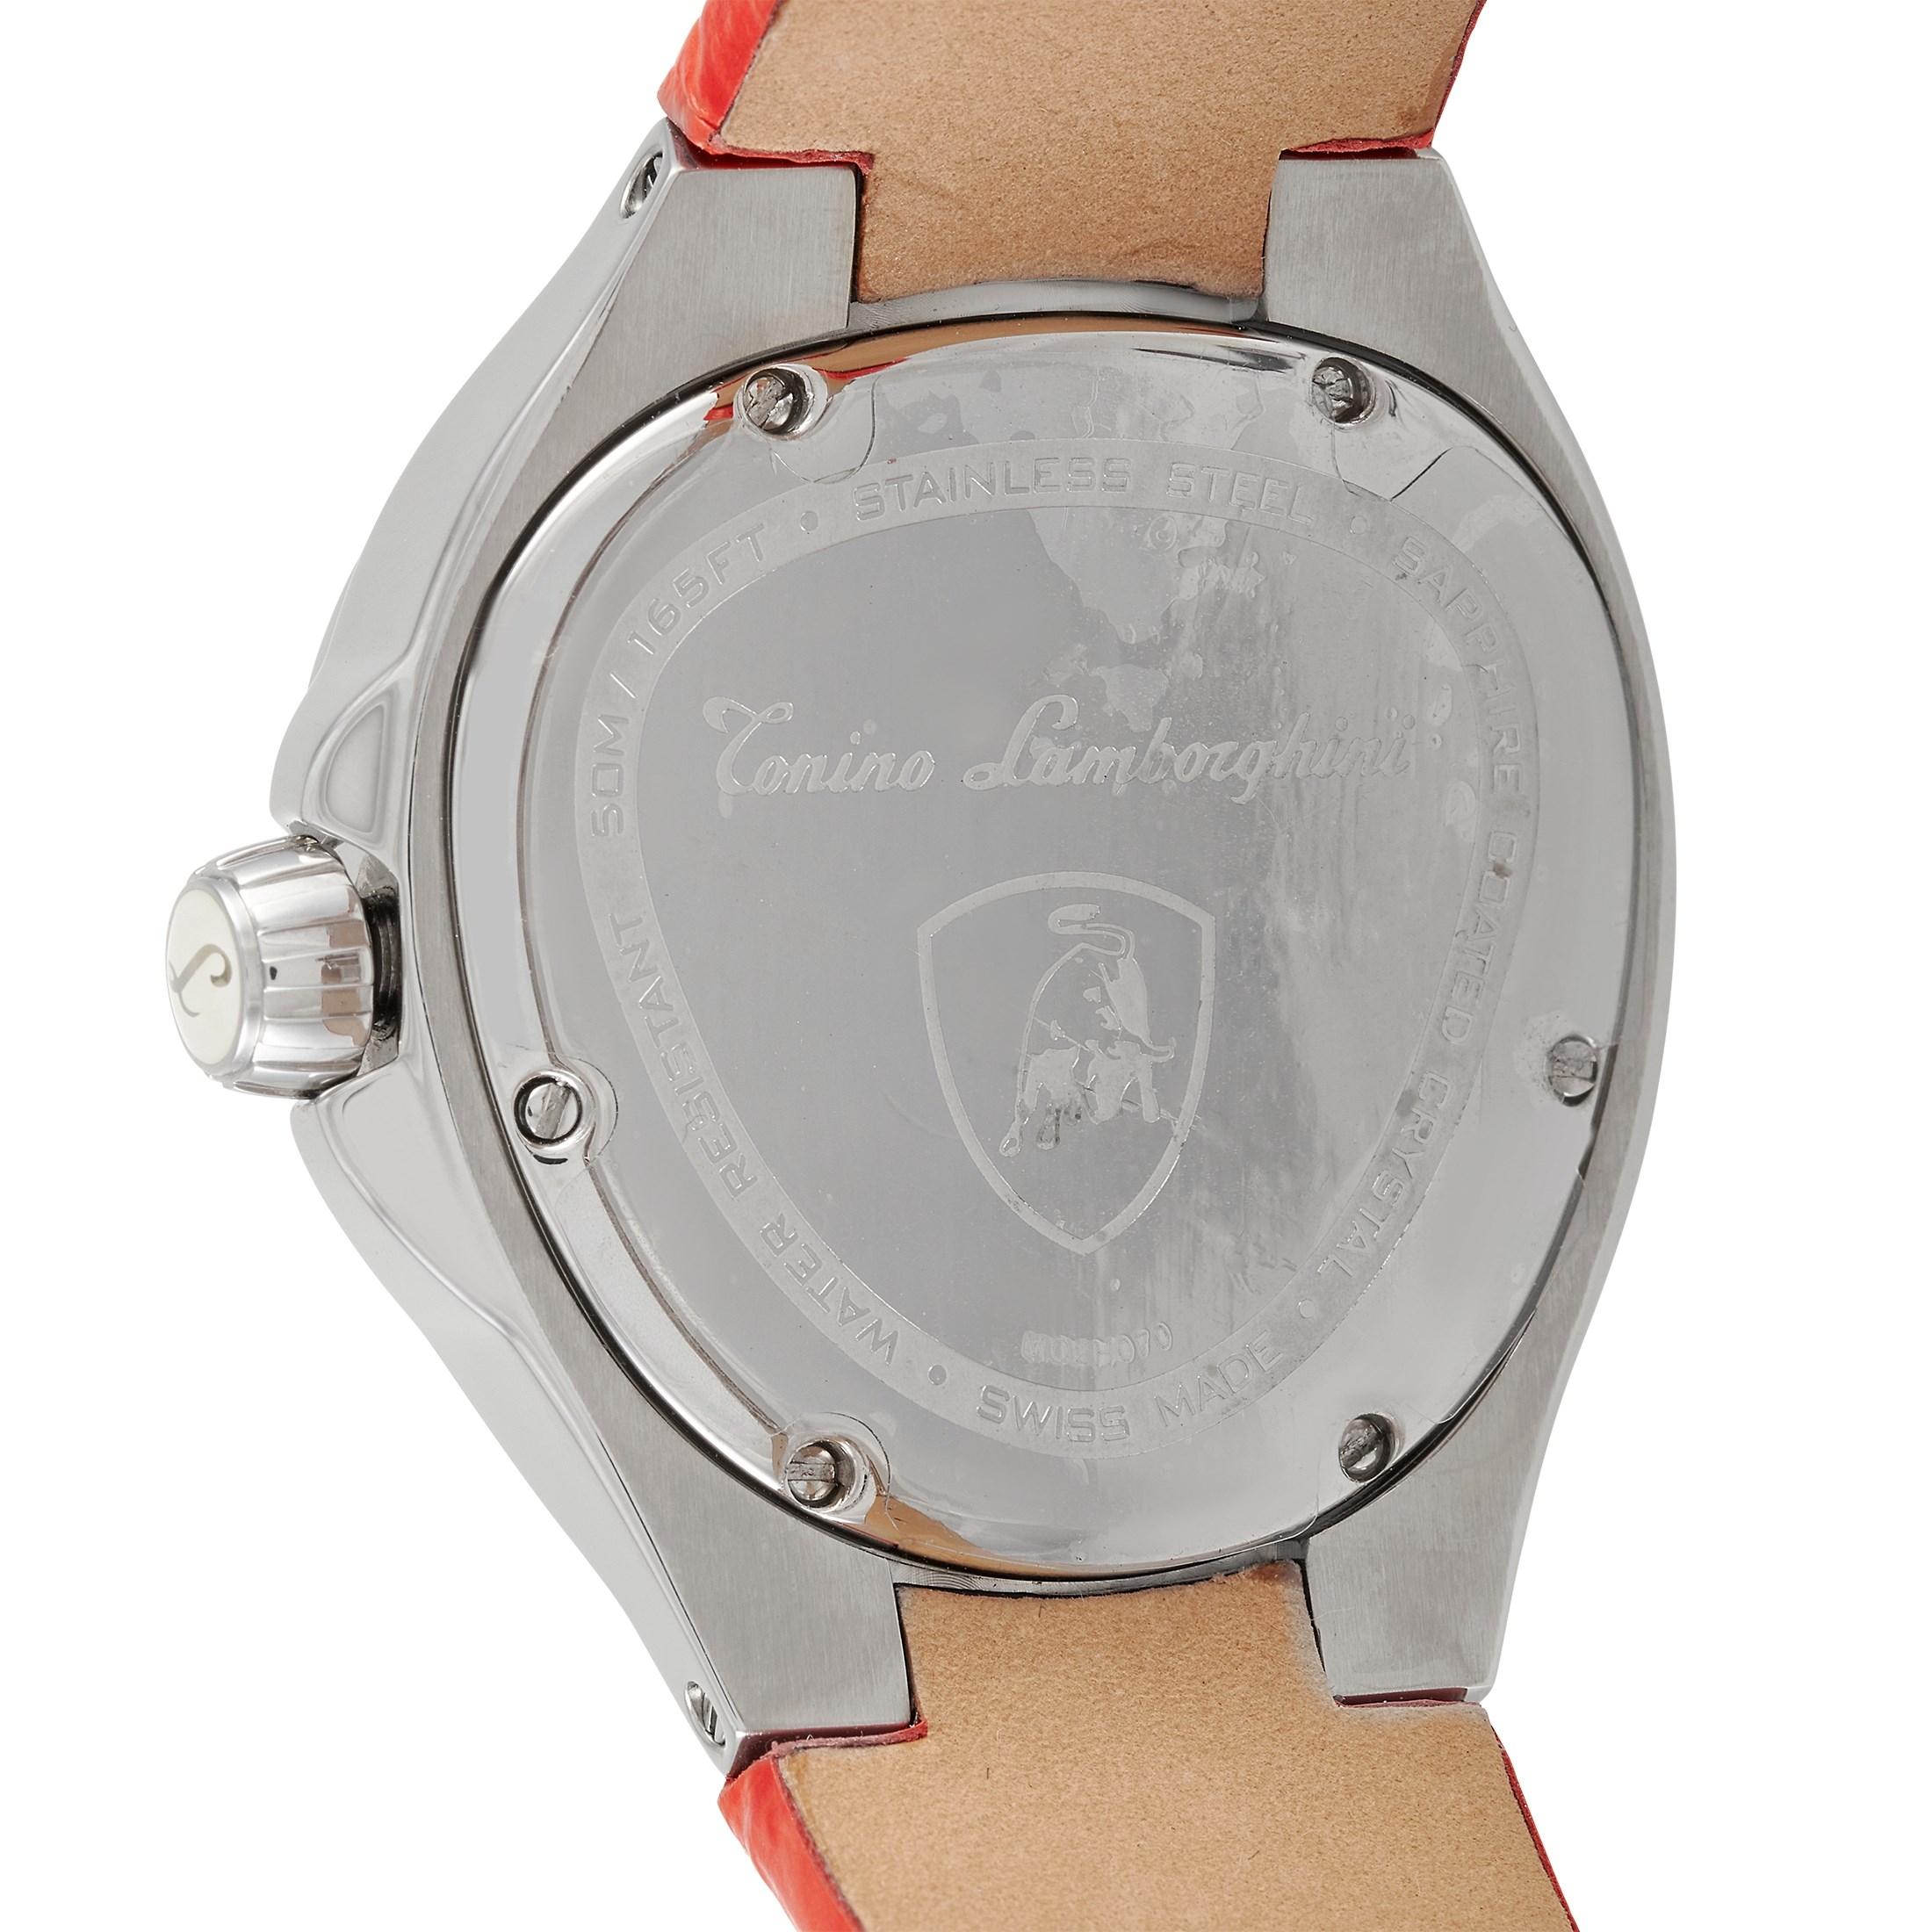 This Tonino Lamborghini Spyder Corsa Lady 702 Stainless Steel 38.30 mm Watch, reference number 702, comes with a gunmetal stainless steel case that measures 38.30 mm in diameter. The case is presented on a red crocodile grain leather strap with